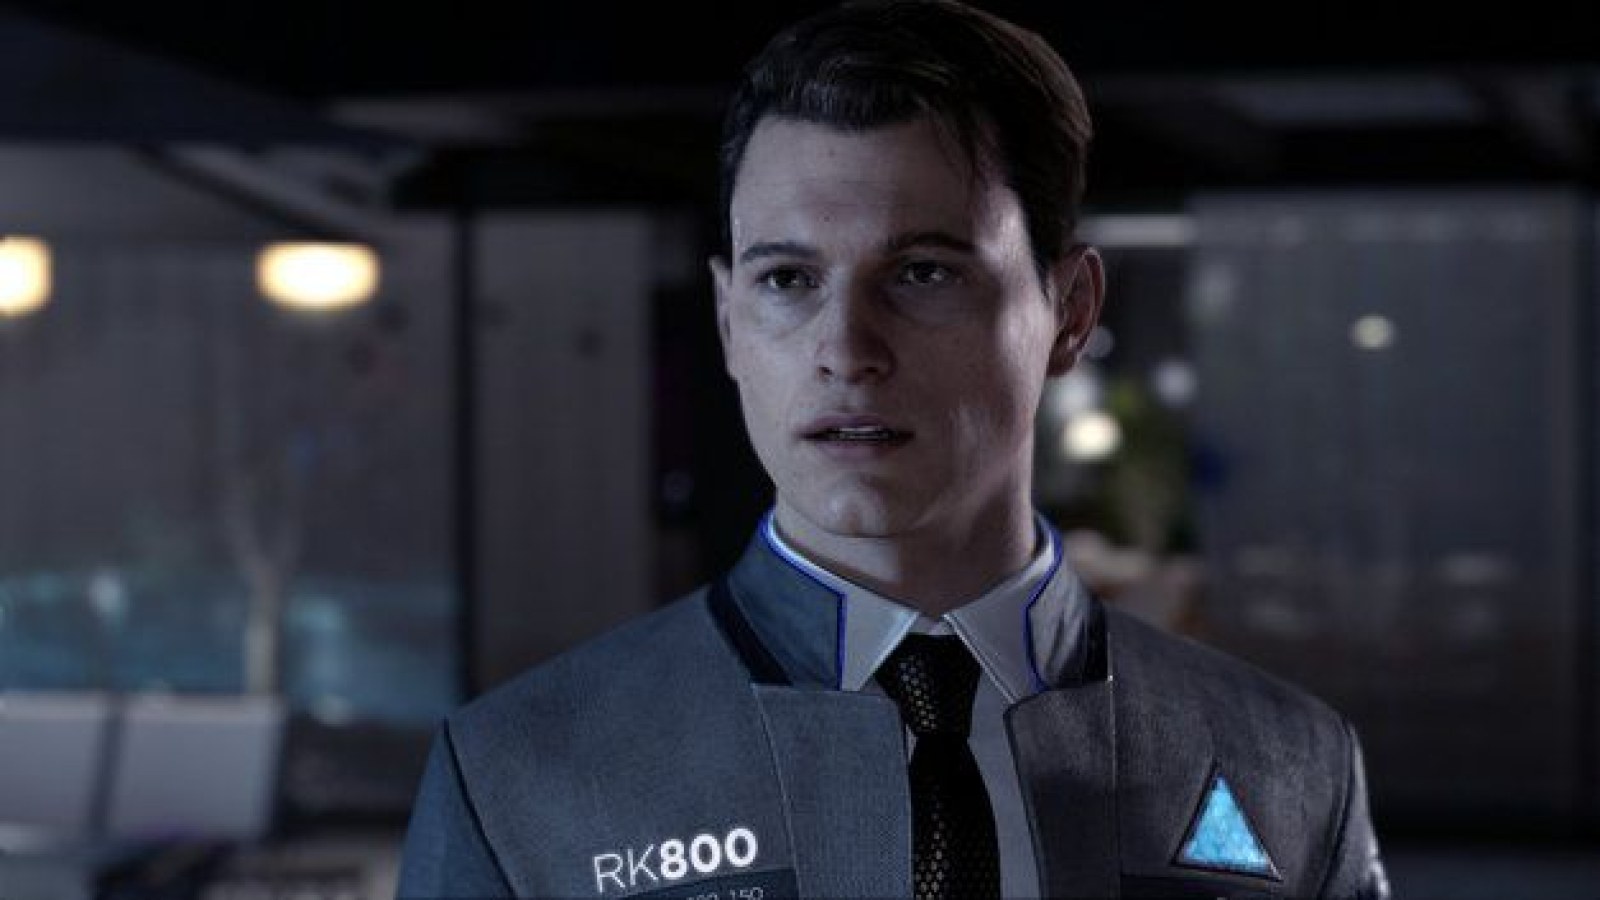 Here's A Quick Tech Analysis Of The 'Detroit: Become Human' Demo